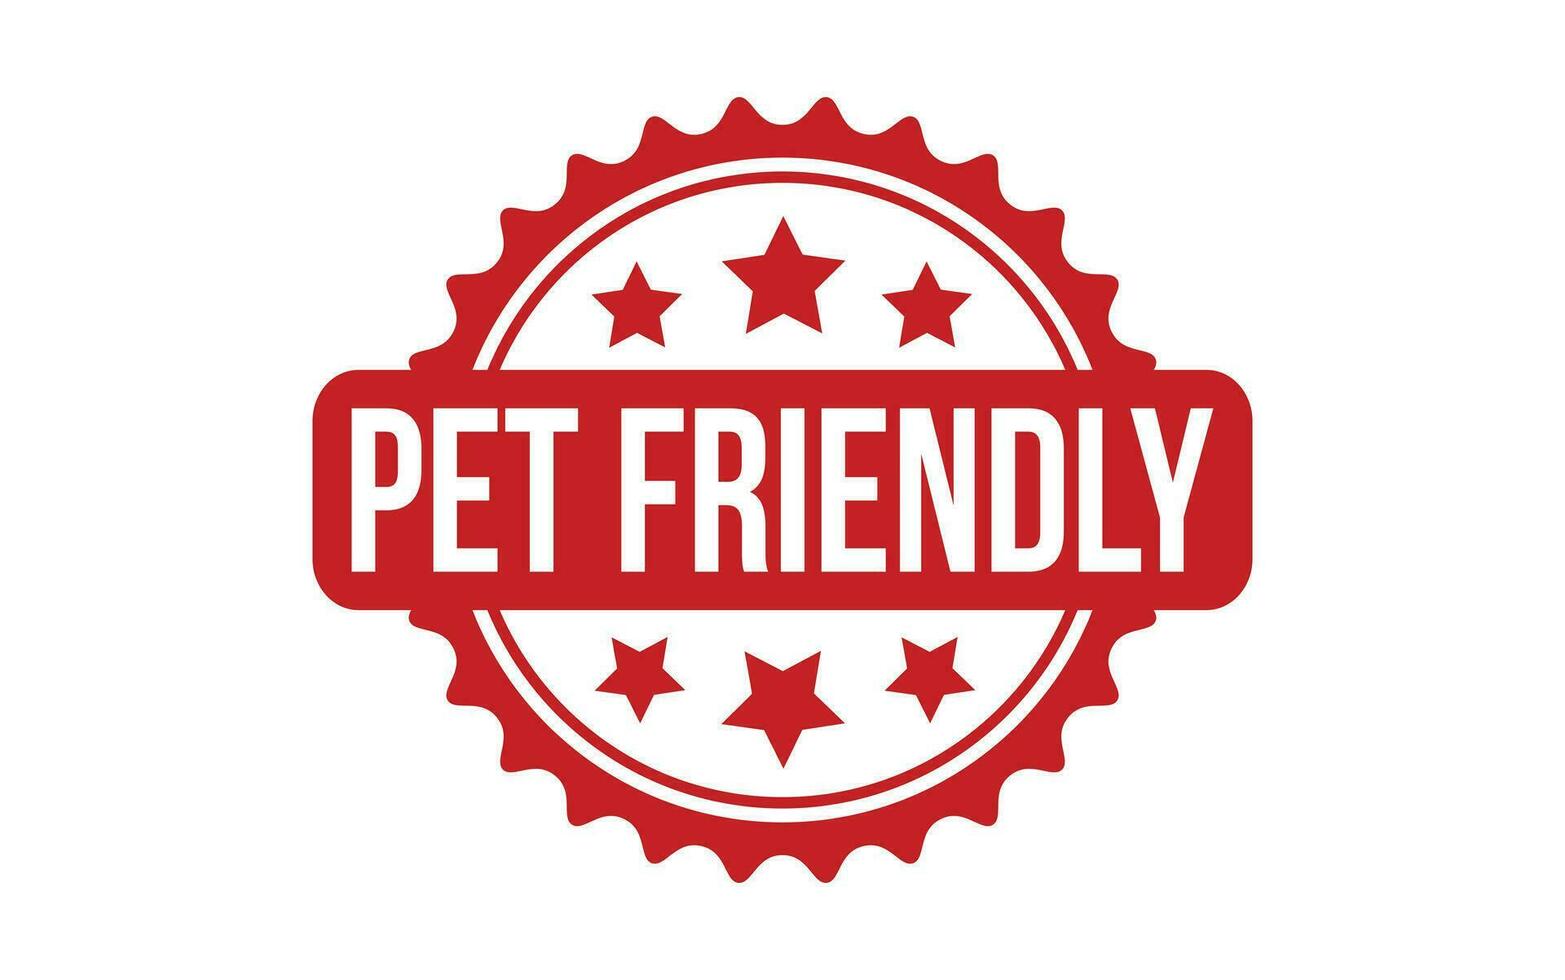 Pet Friendly rubber grunge stamp seal vector